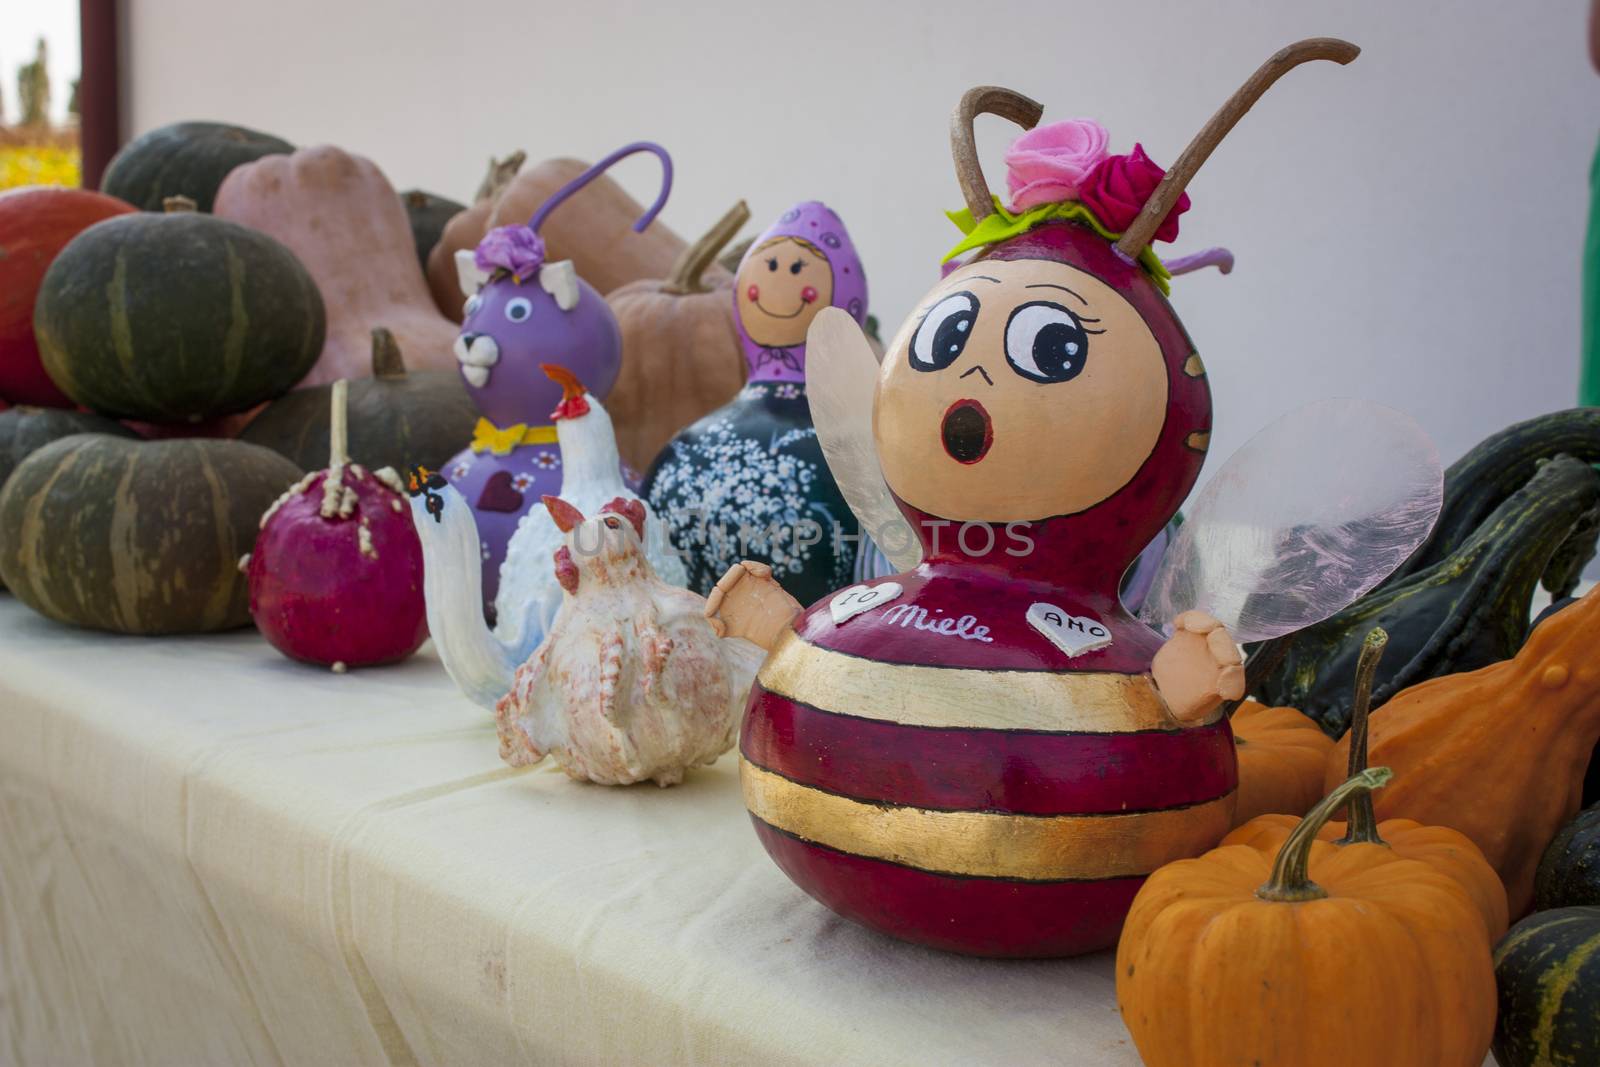 Stall at a marketplace containing small handicraft sculptures in the form of various animals made with pumpkins.